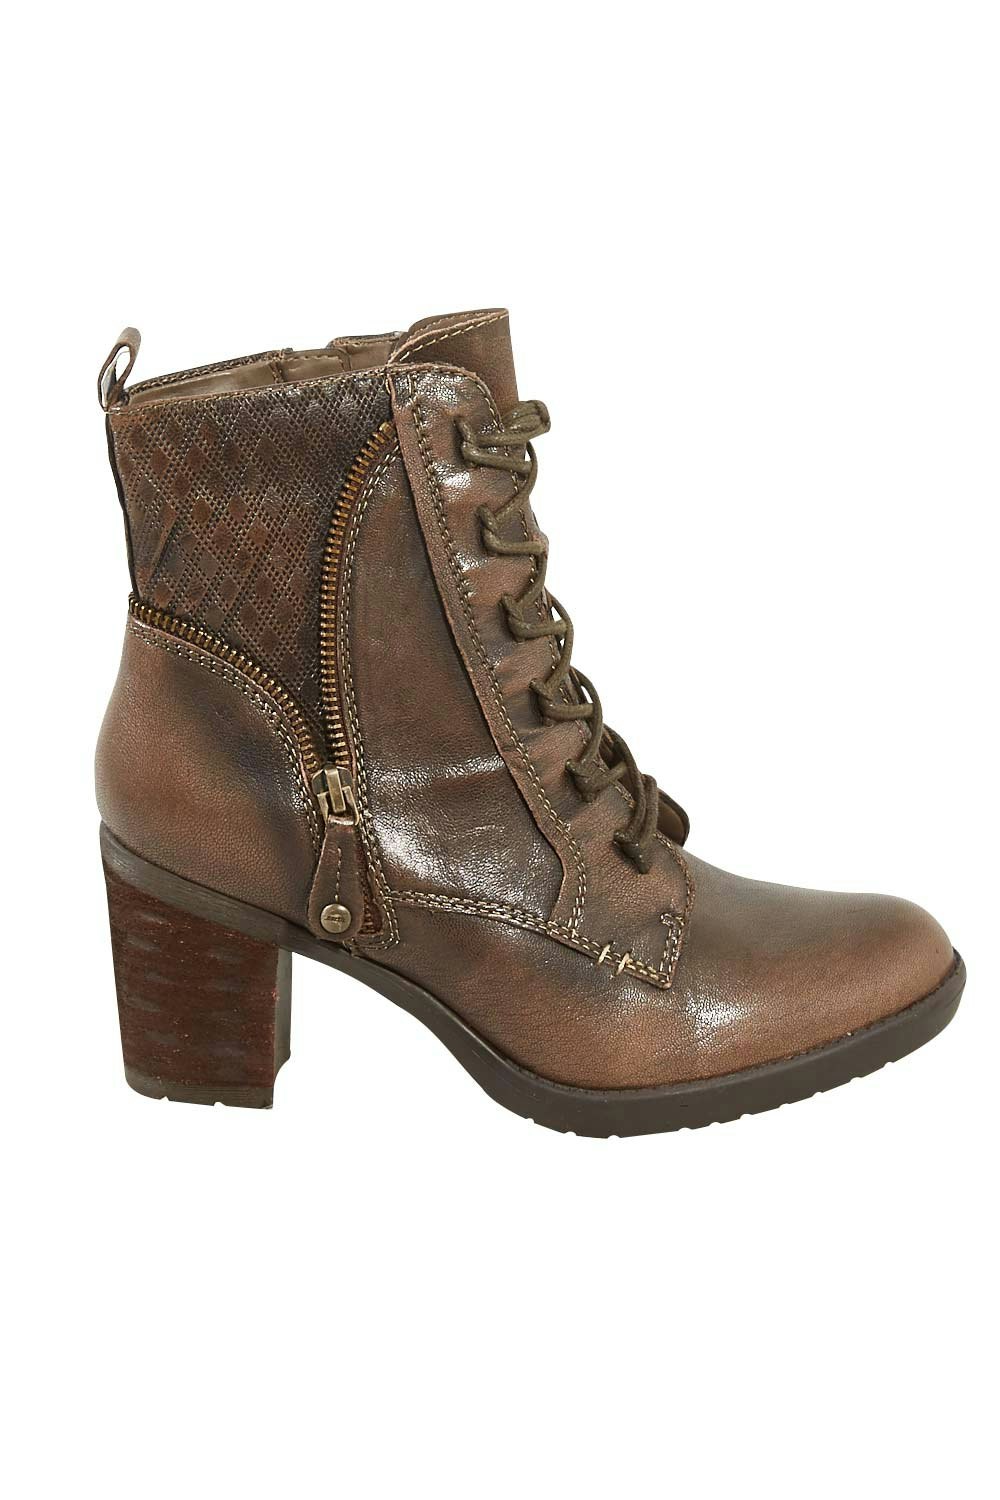 Earth Shoes Missoula Ankle Boot - Womens Boots at Birdsnest Fashion